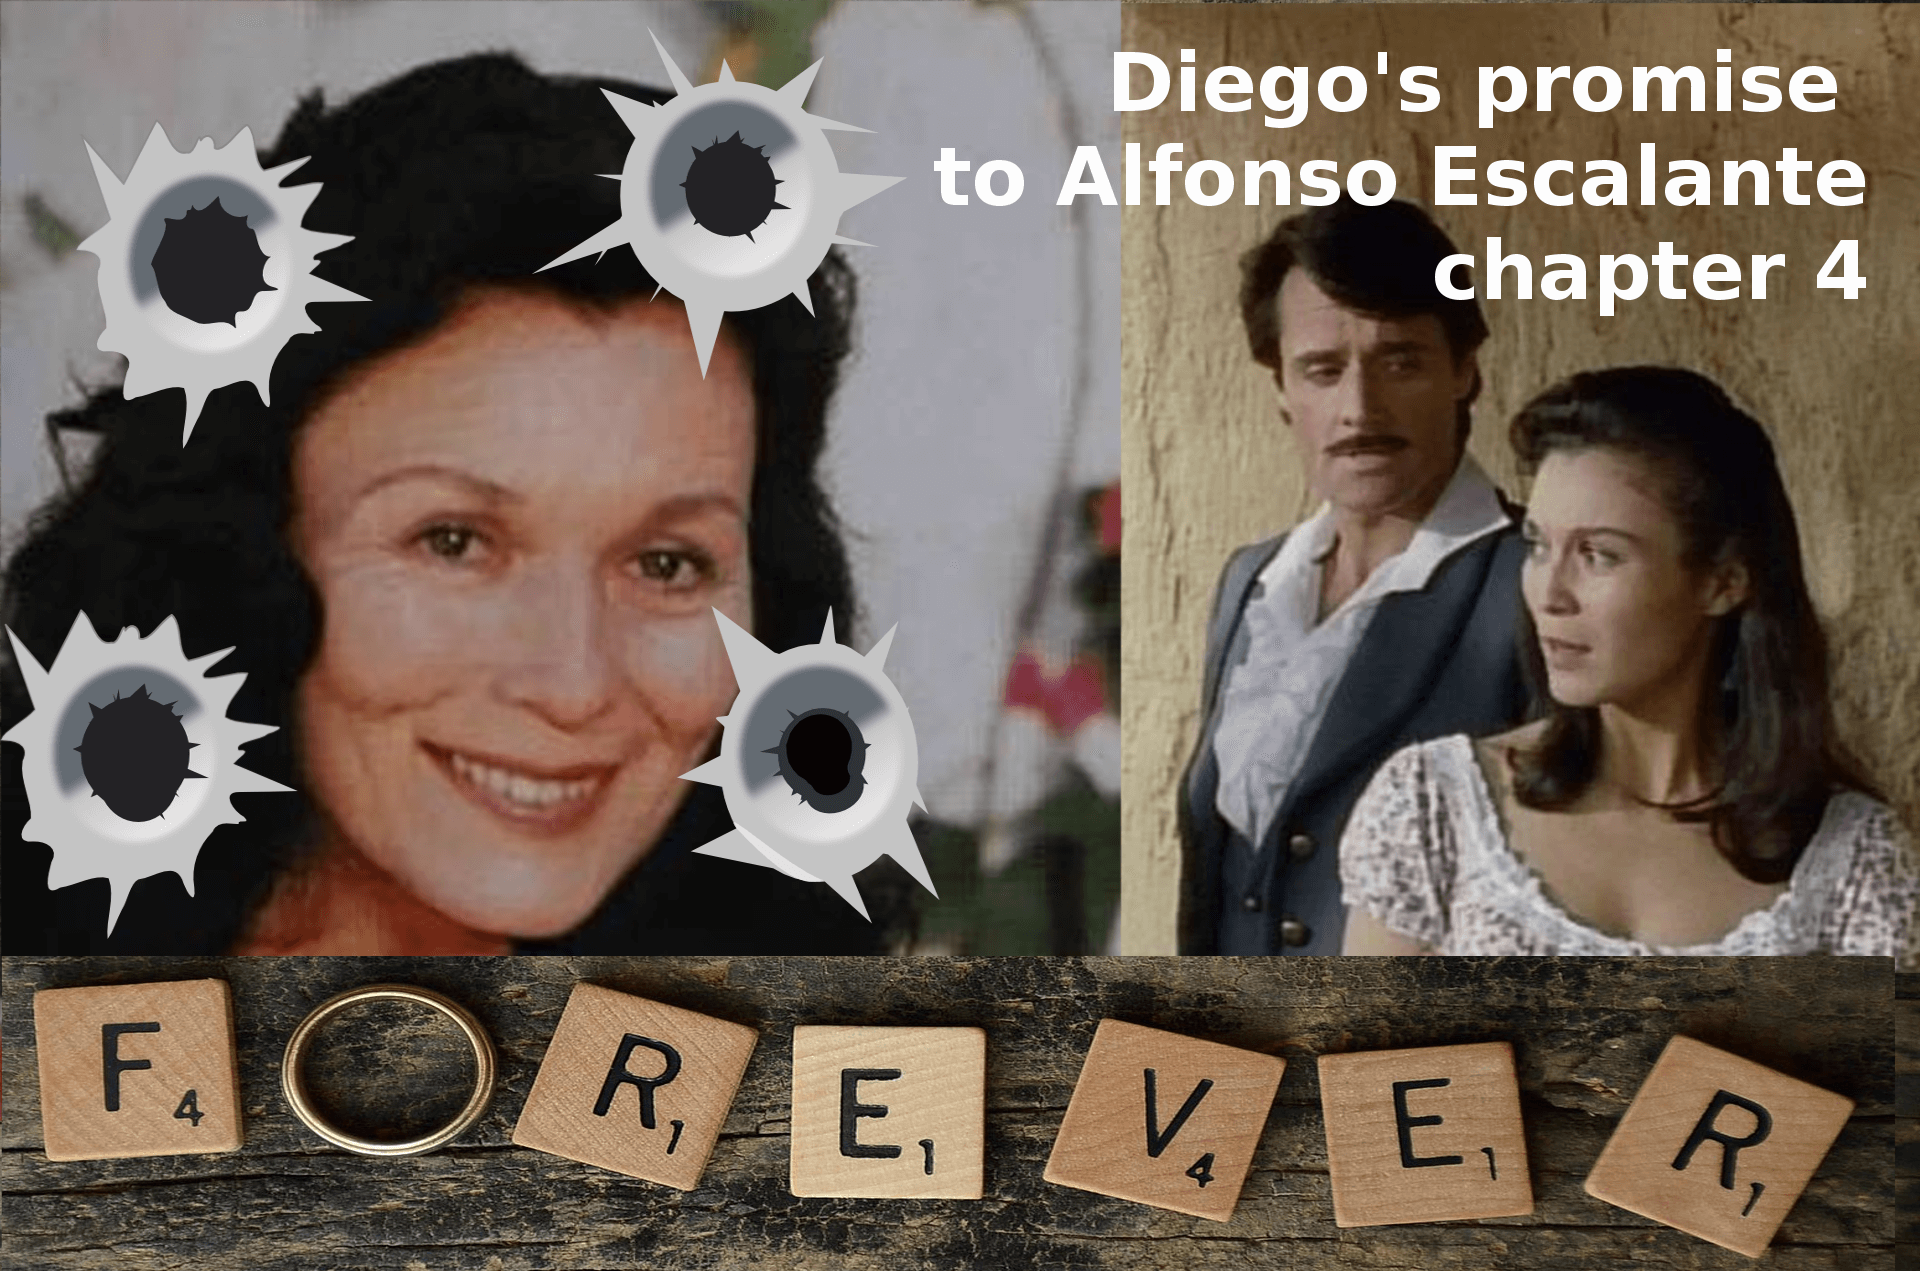 Diego's promise to Alfonso Escalante – chapter 4 Zorro fanfiction